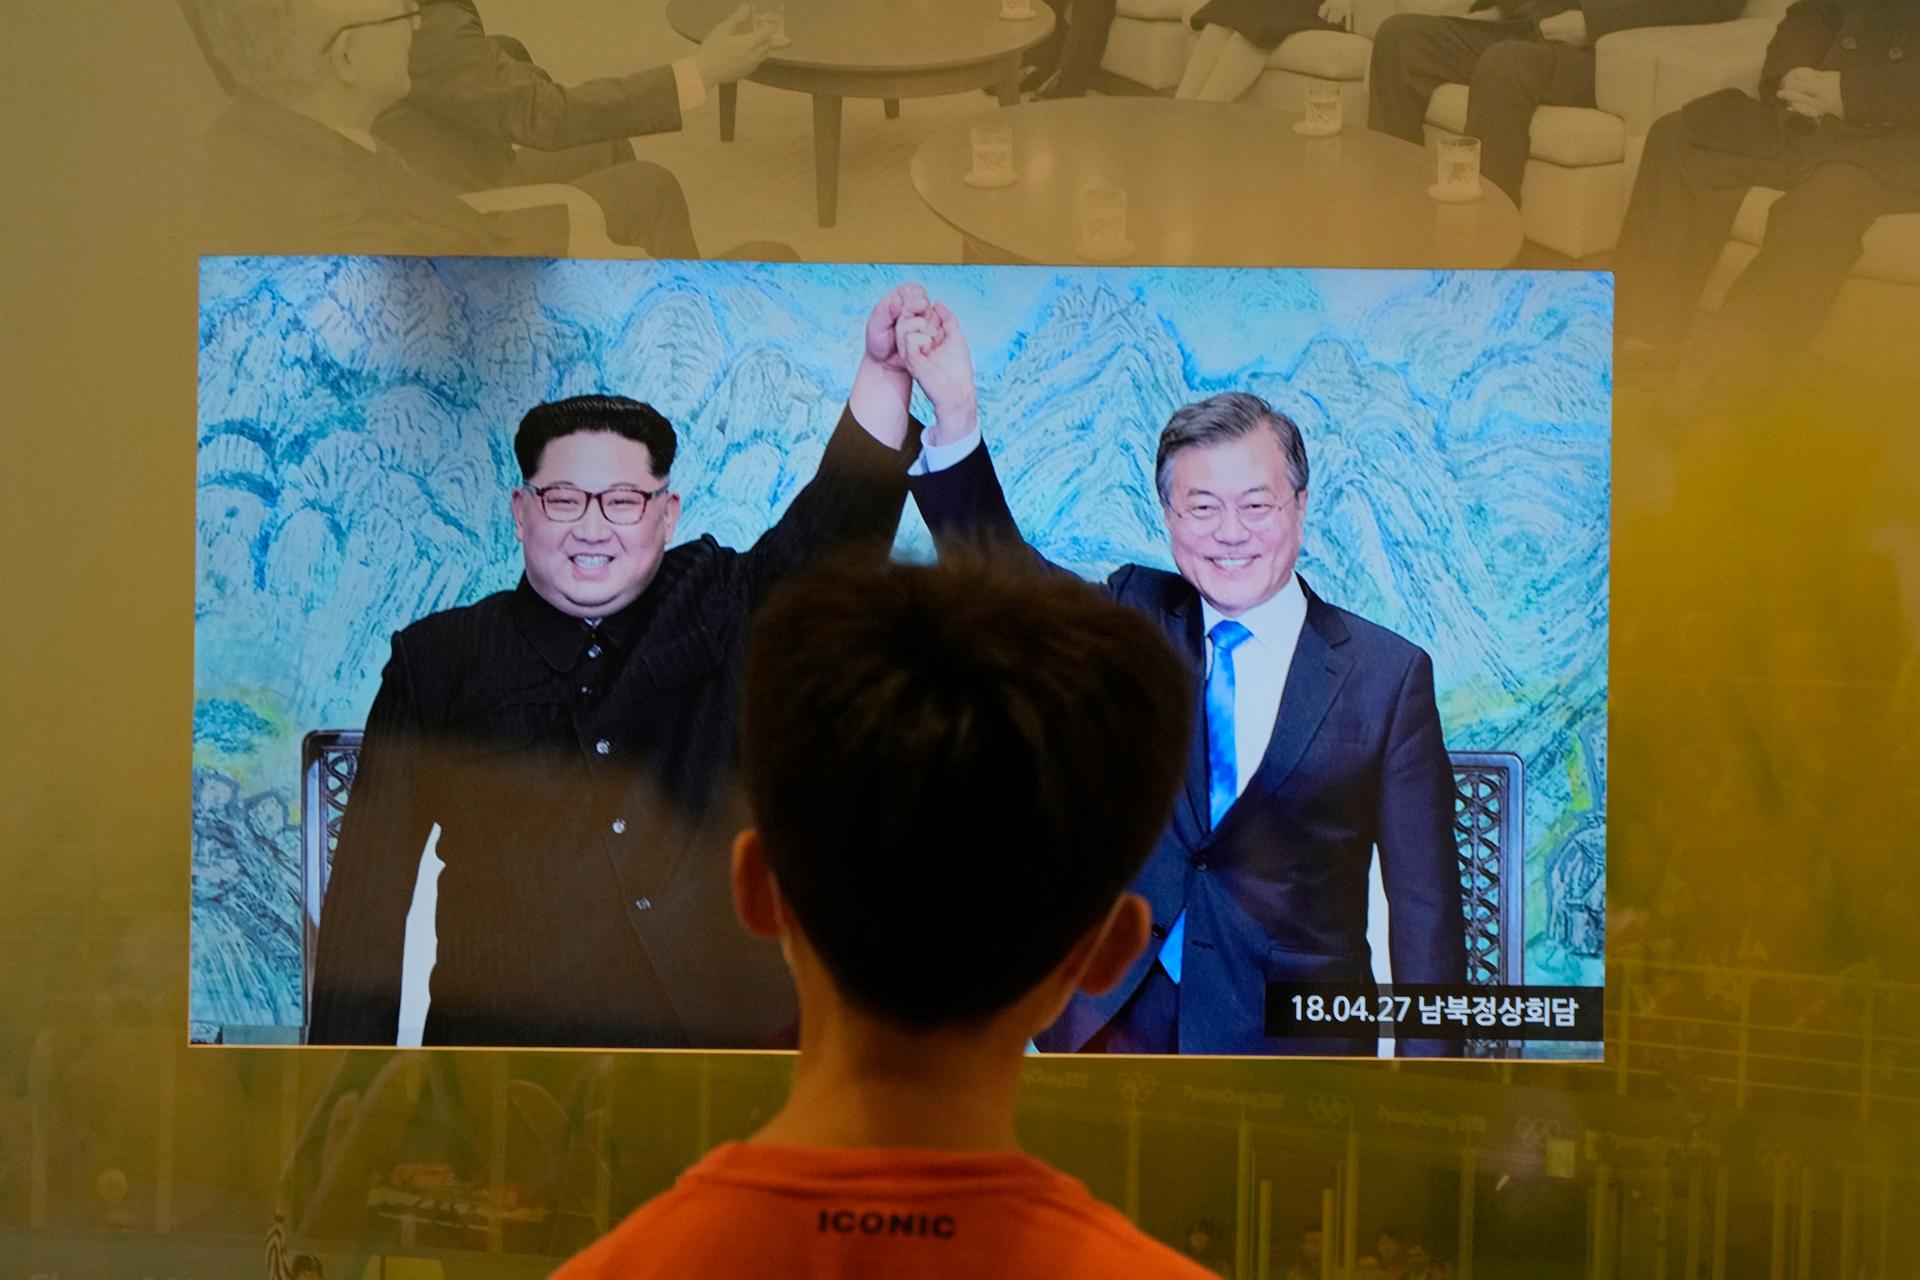 Efforts to reduce tensions between the Koreas, like the 2018 inter-Korean summit, are frequently the target of disinformation campaigns in South Korea.